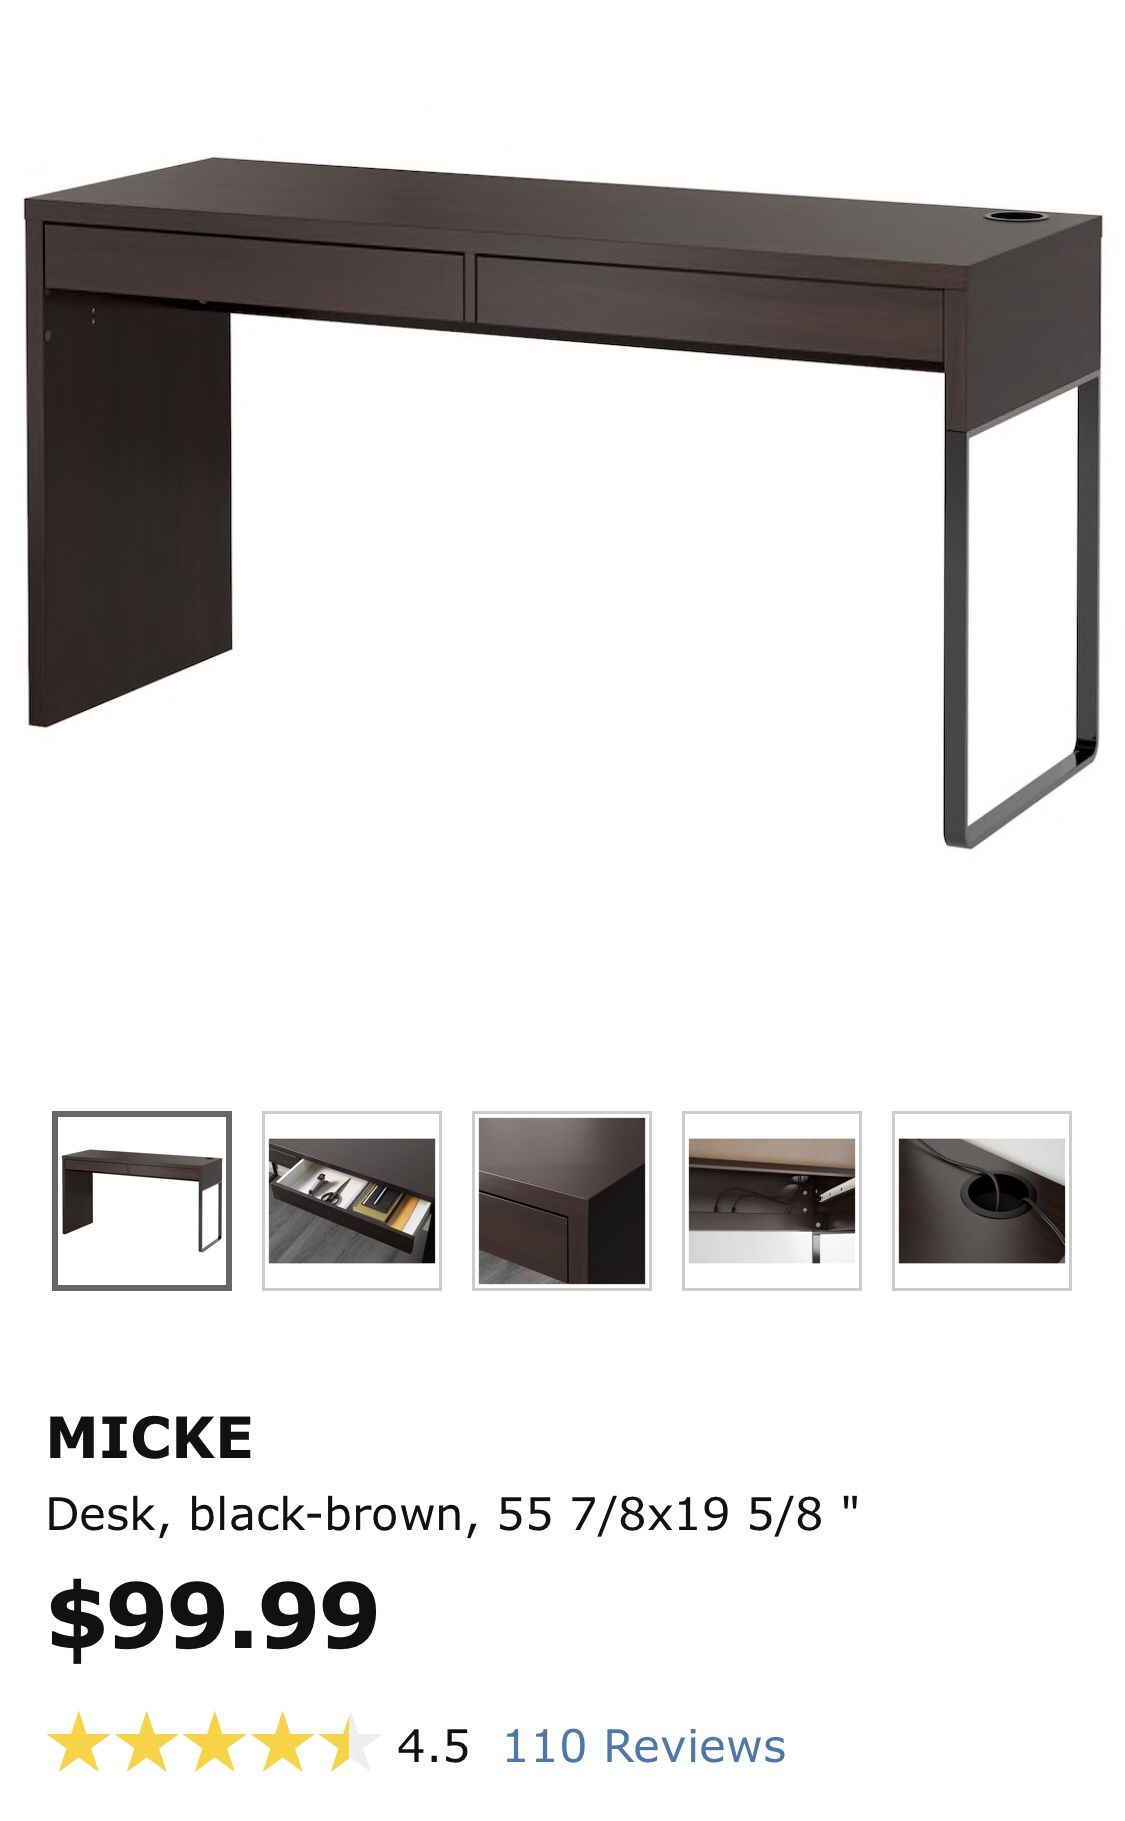 IKEA office desk and office chair